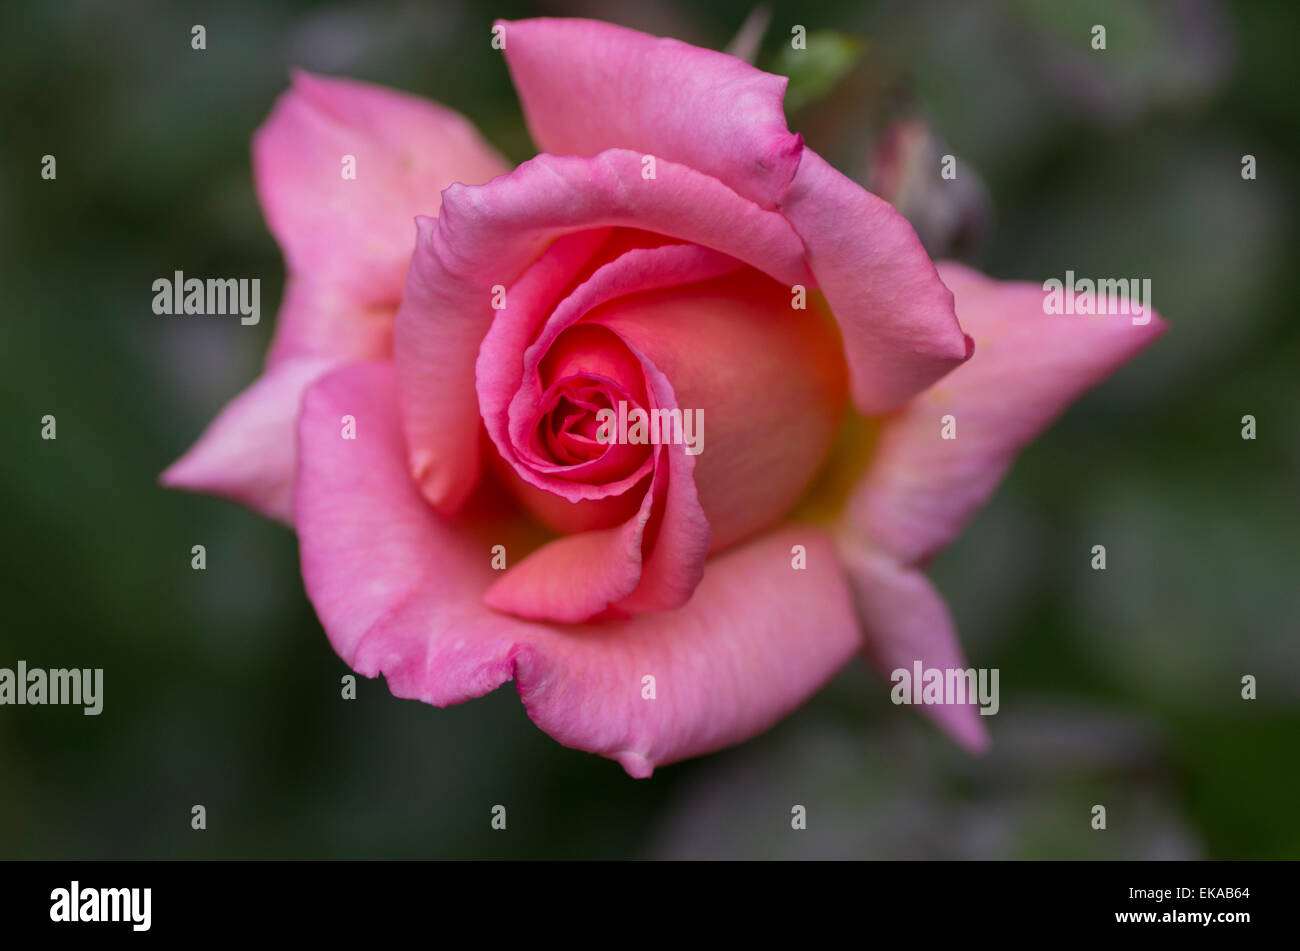 beautiful pinkish red rose against blurred background Stock Photo